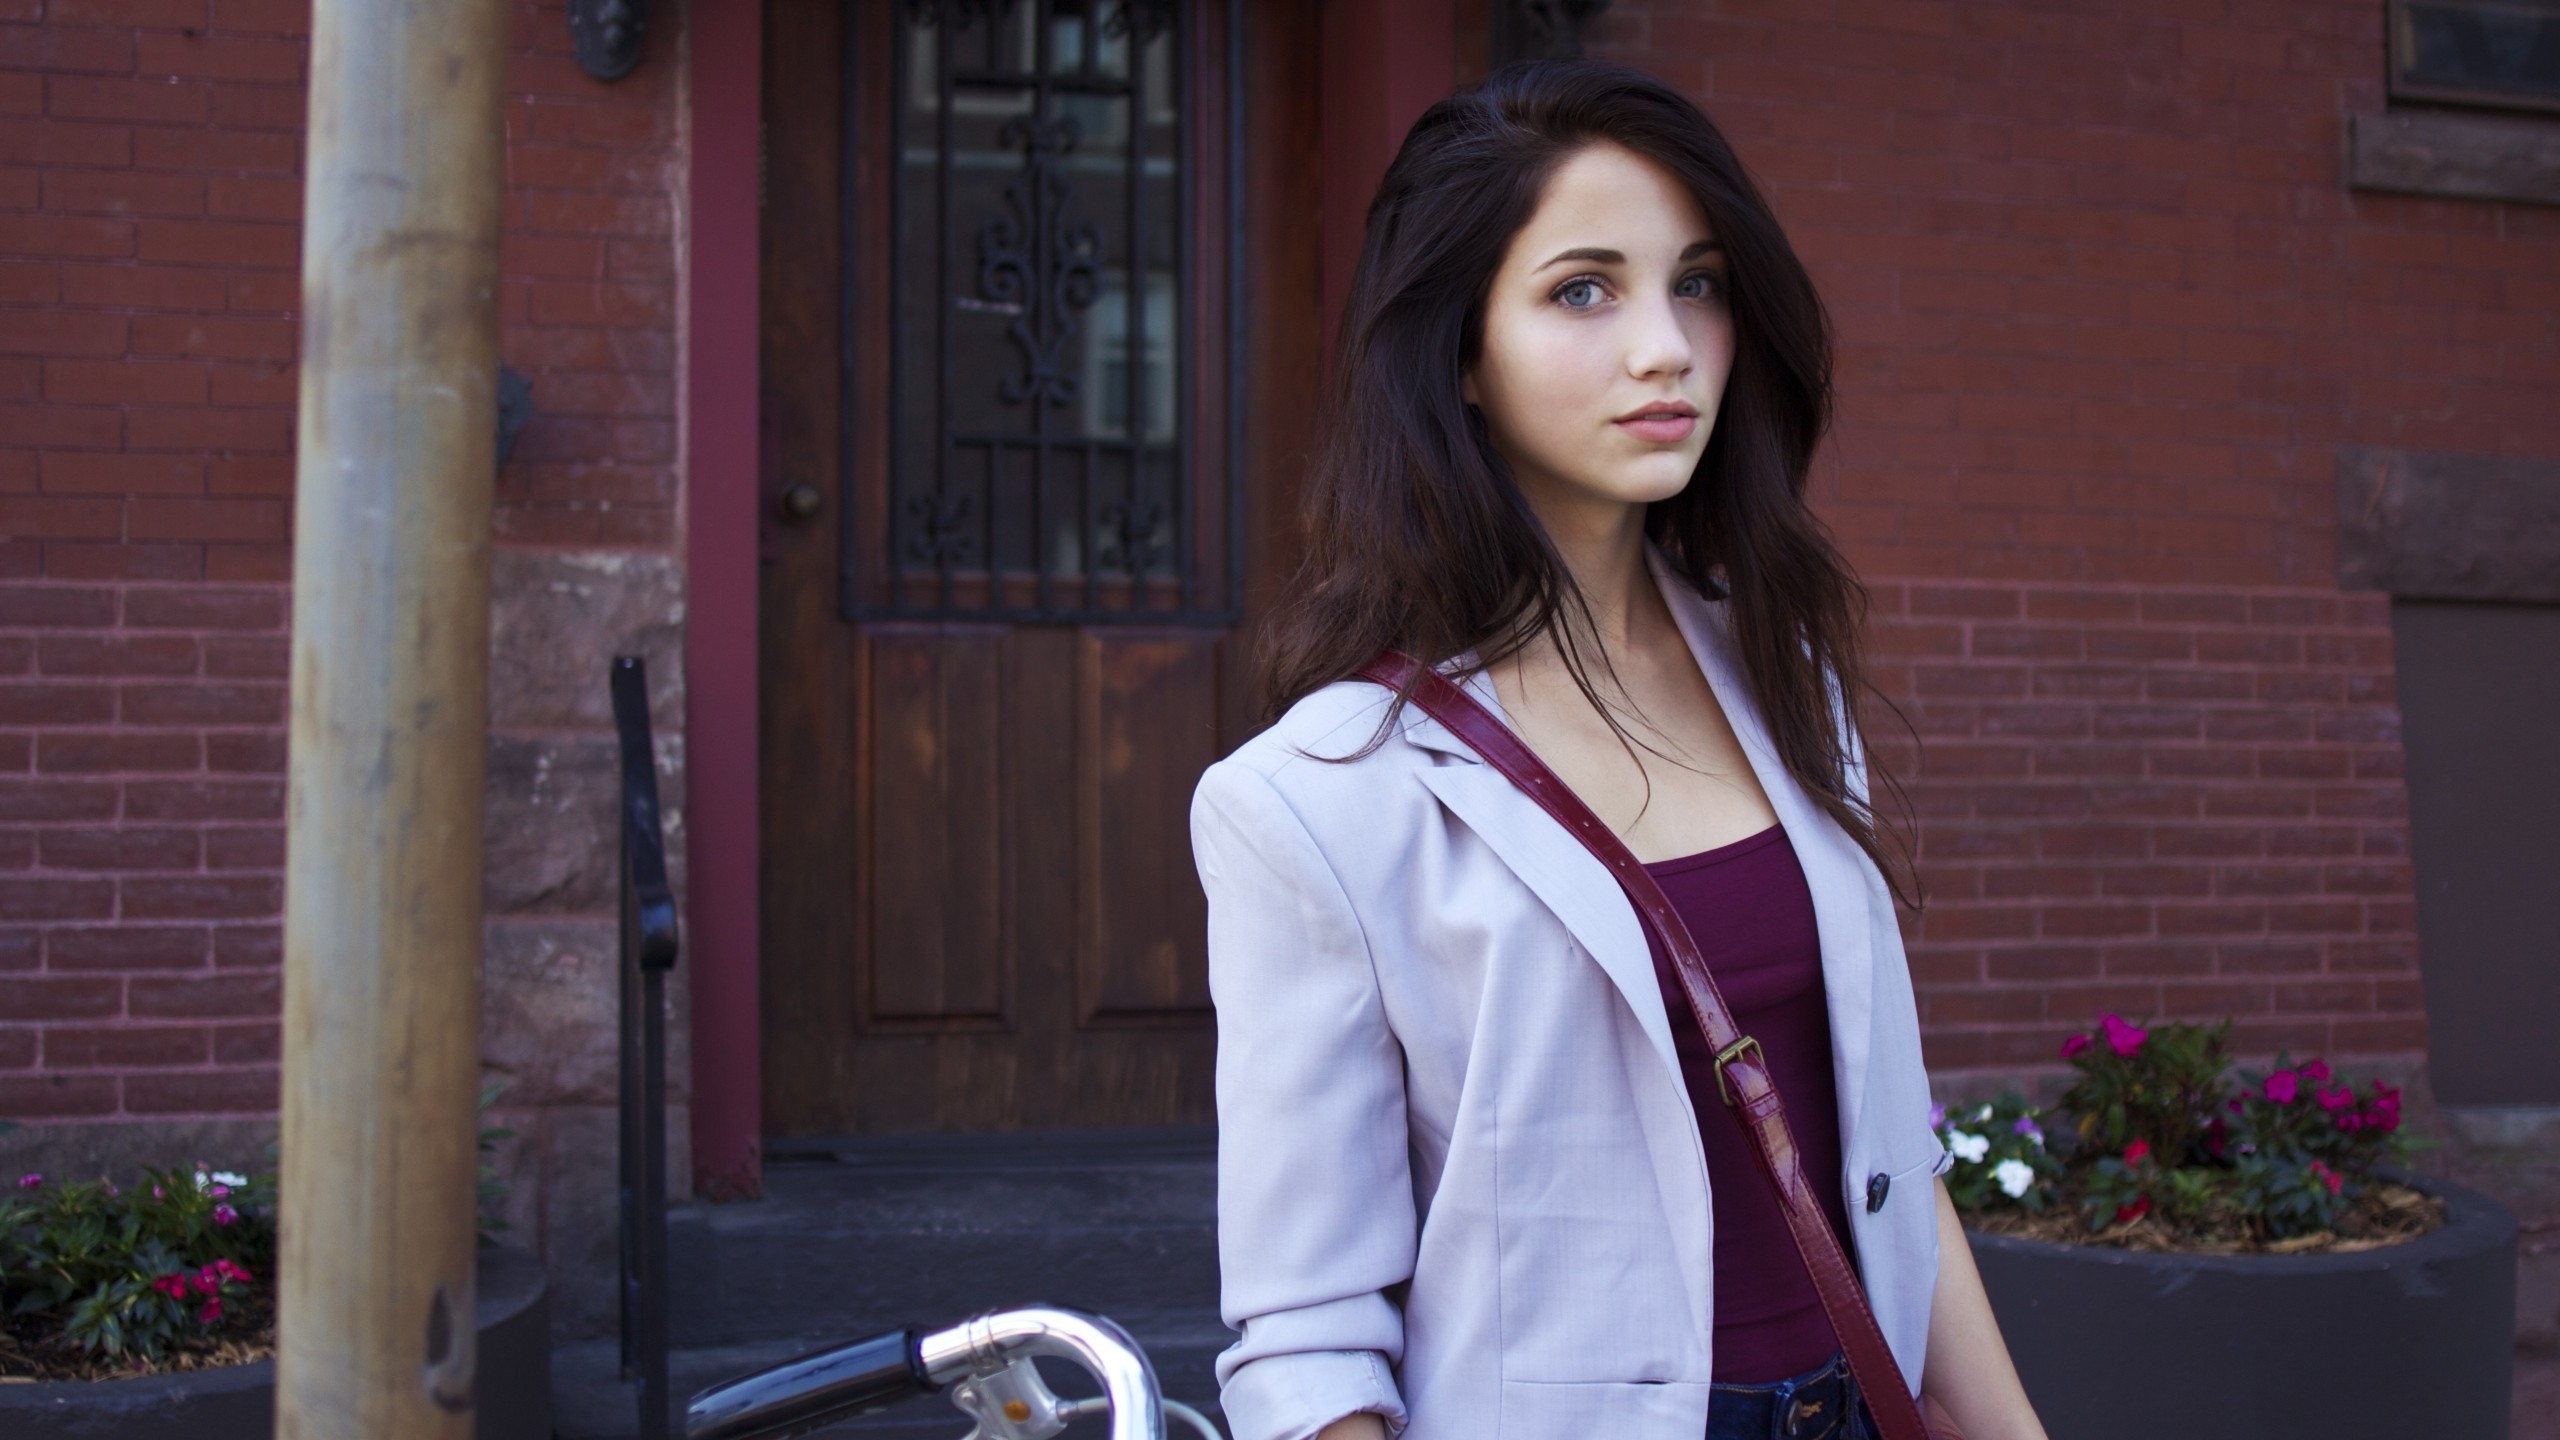 Emily Rudd Brunette Women Blue Eyes Looking At Viewer Long Hair White Jacket Red Tops Stairs 2560x1440